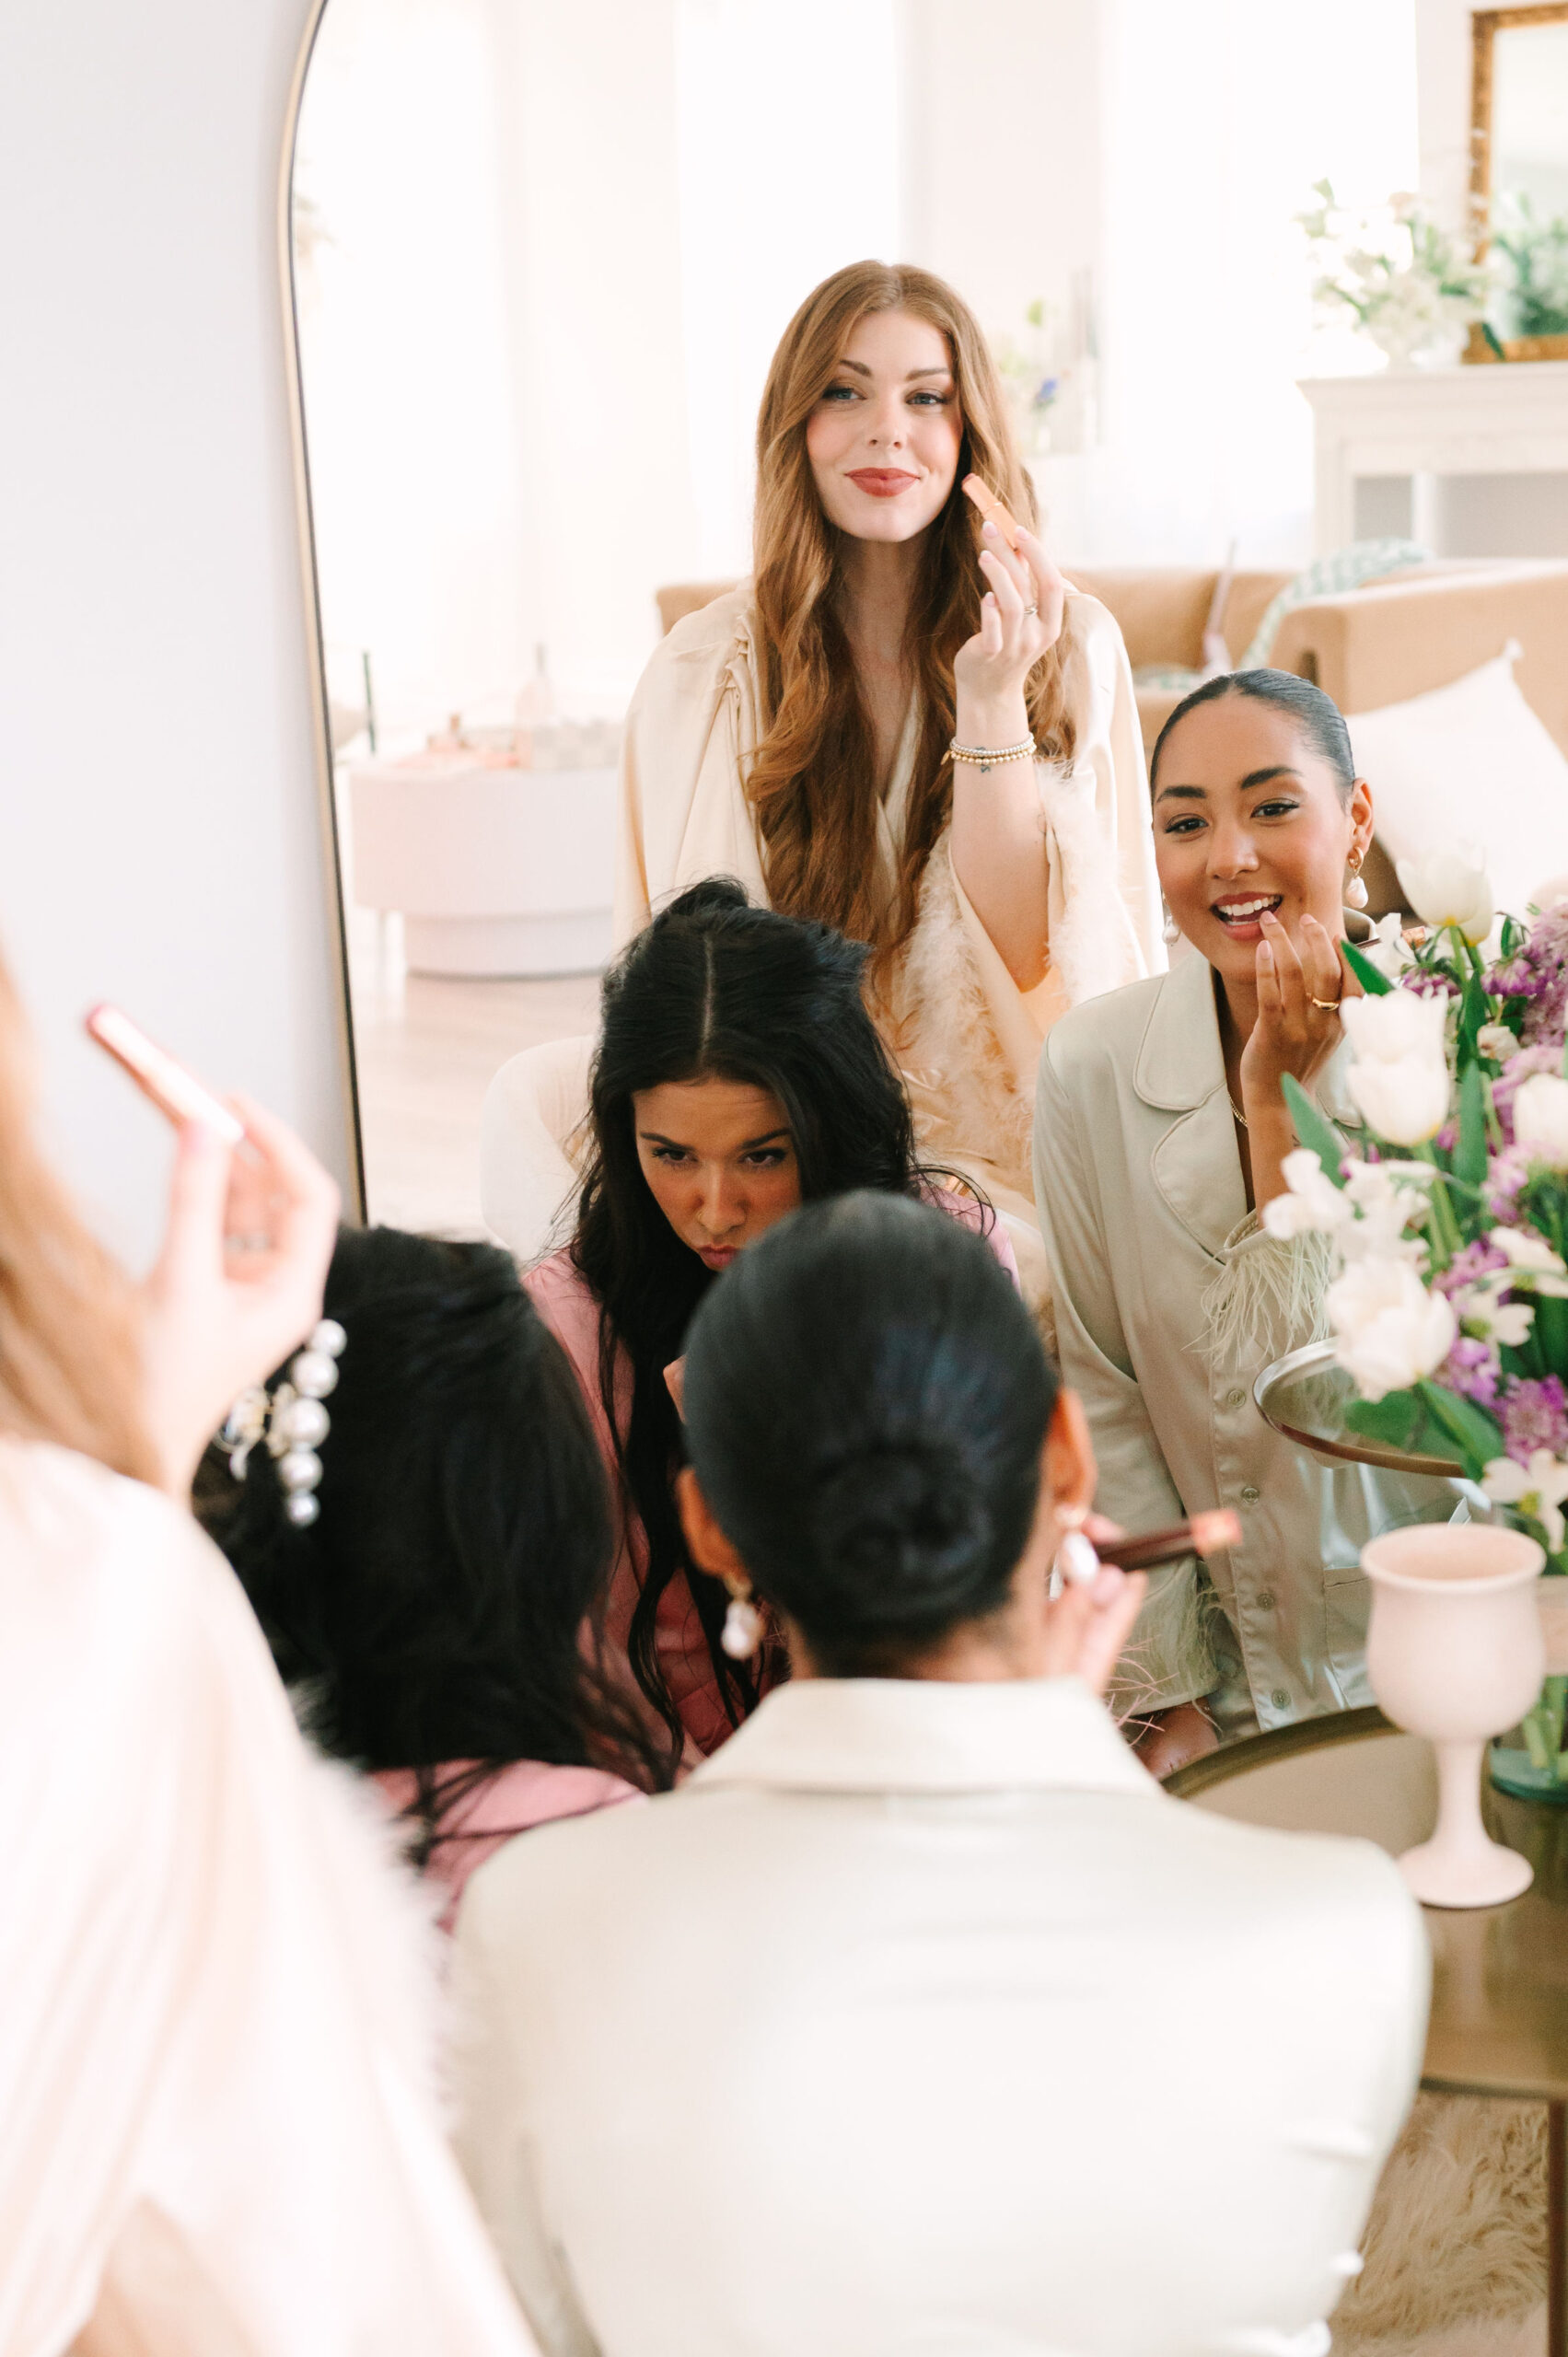 Vendors for Weddings: Getting Ready Tips For Your Wedding Day